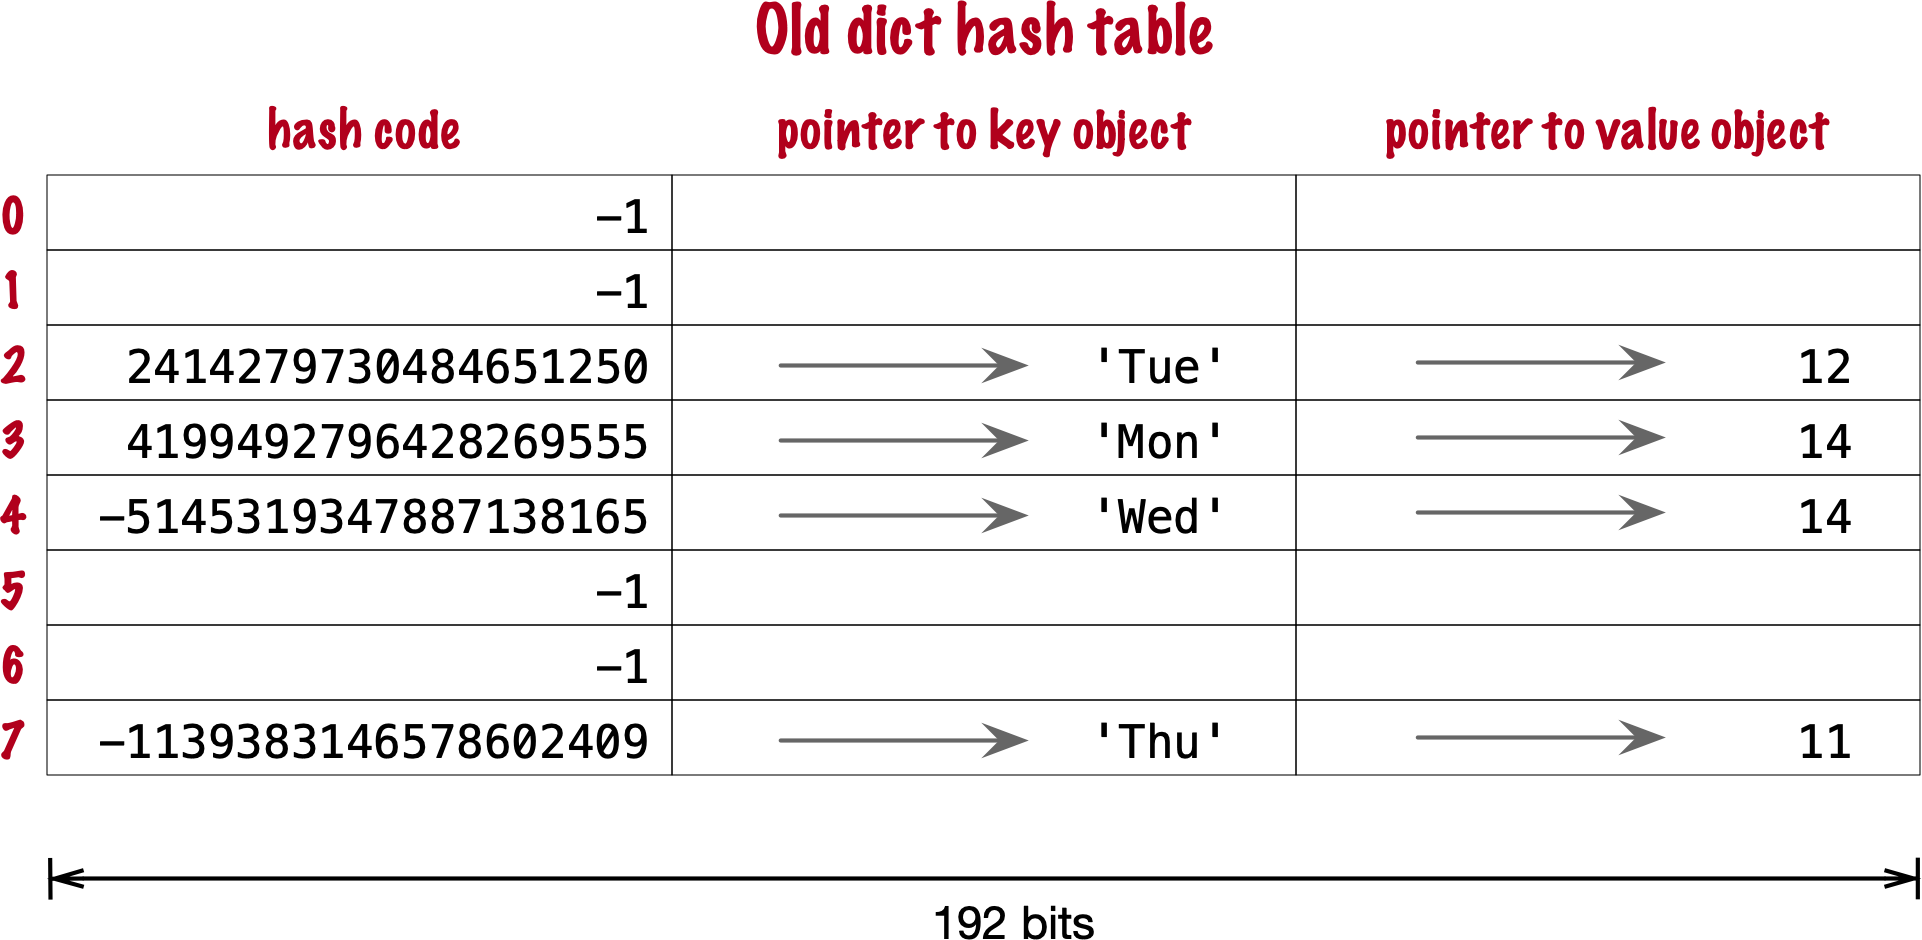 Hash table for old `dict` with 4 key-value pairs.